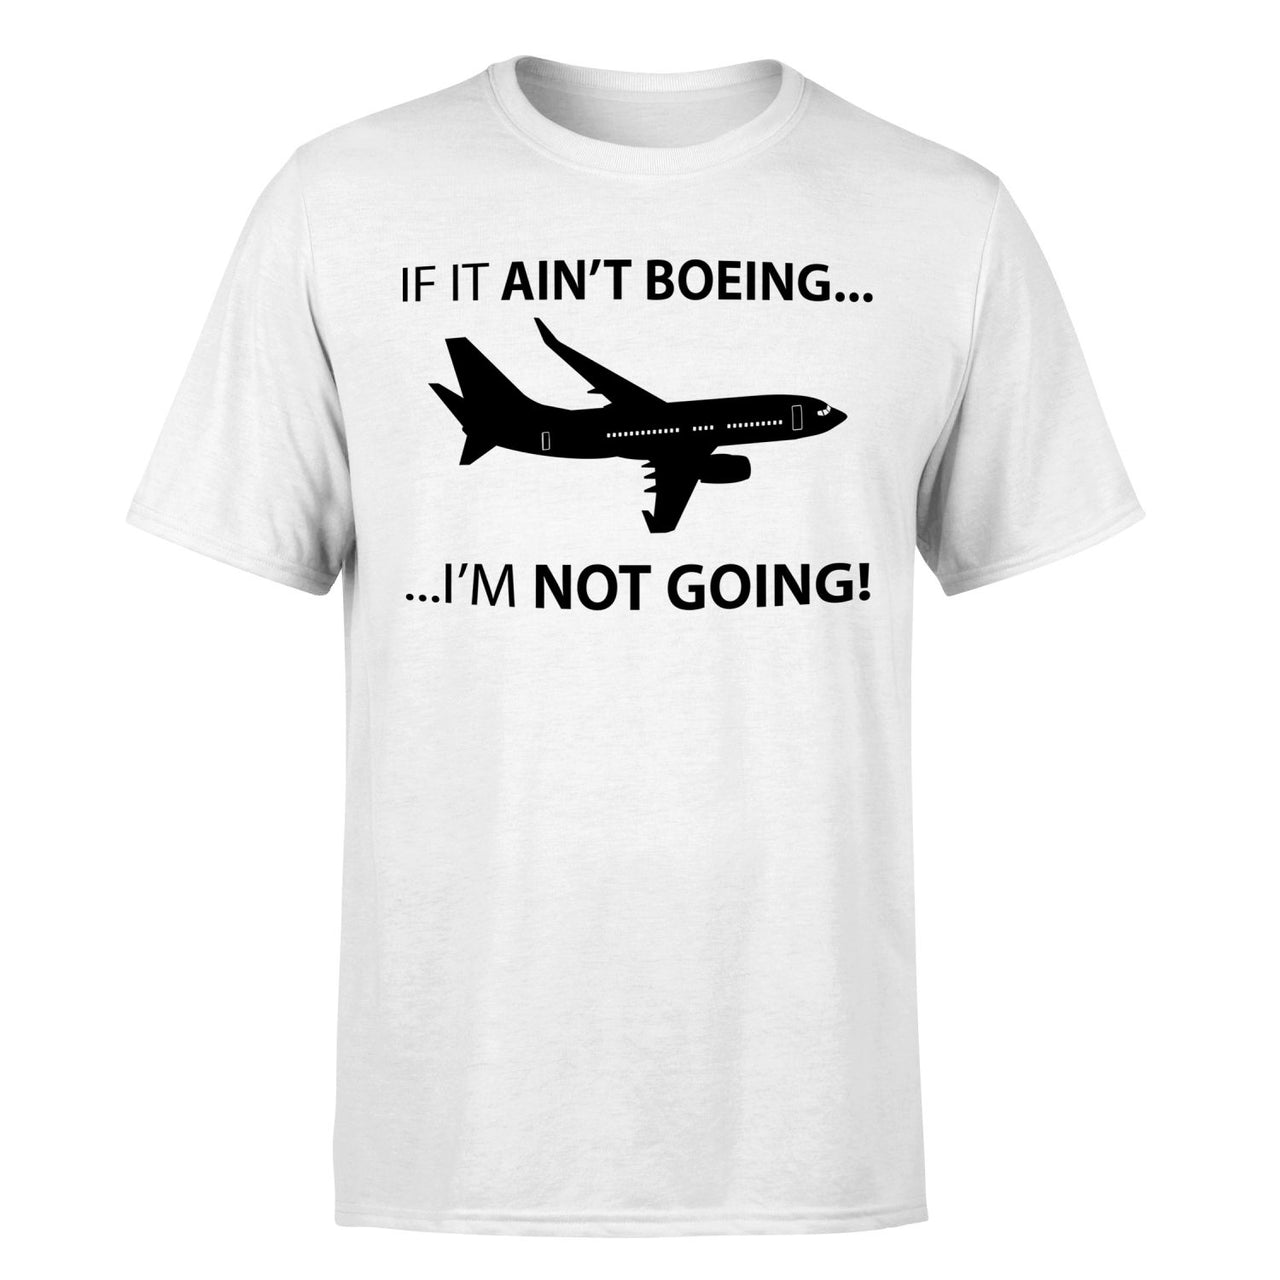 If It Ain't Boeing I'm Not Going! Designed T-Shirts